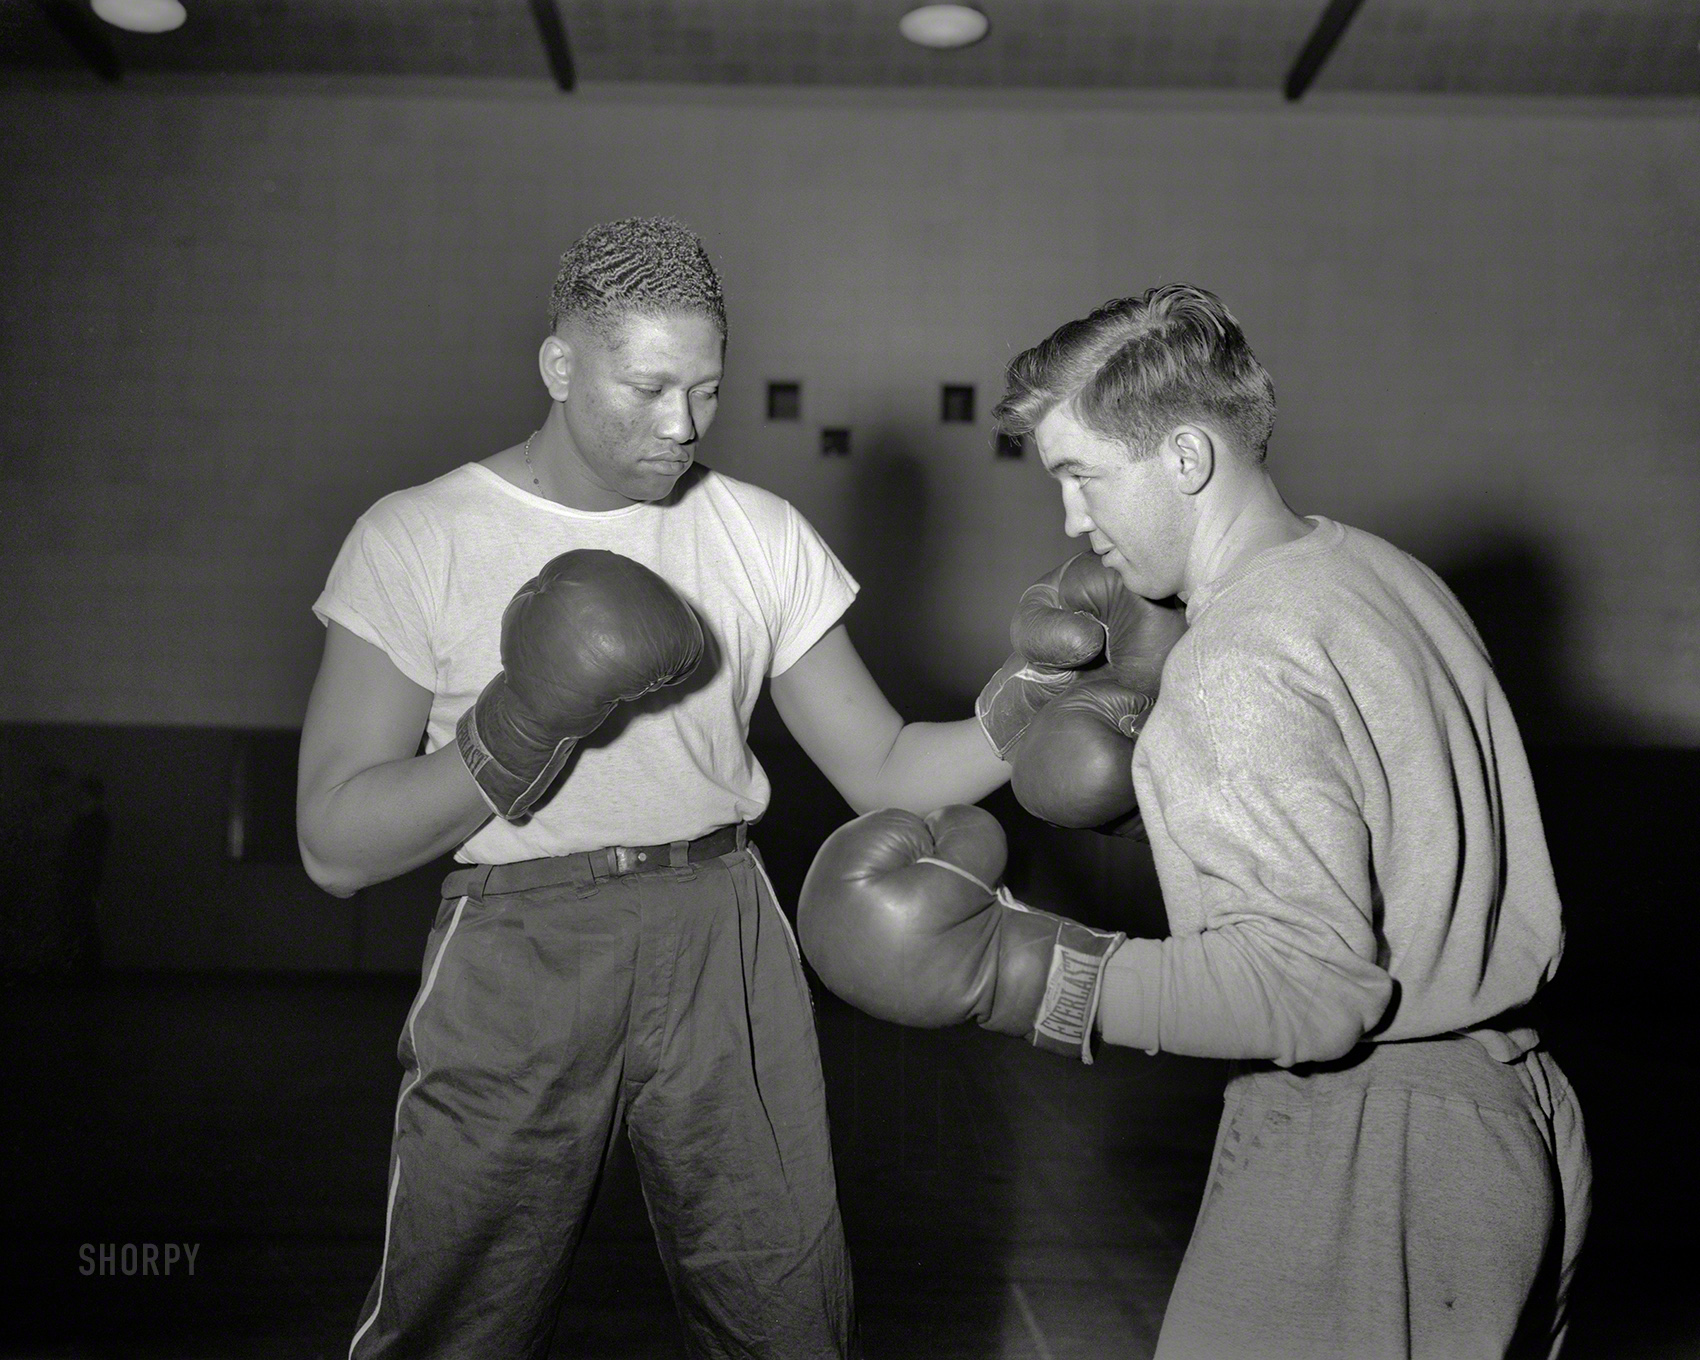 January 1943. "The gymnasium is one of the busiest places at the Manhattan Beach Coast Guard training station. The physical education program is handled by many noted exponents of boxing, wrestling, track and judo. Paul "Tiny" Wyatt, one-time leading contender for heavyweight boxing honors, is shown sparring with Herb Kroeten, former Golden Gloves champ." 4x5 nitrate negative by Roger Smith for the Office of War Information. View full size.